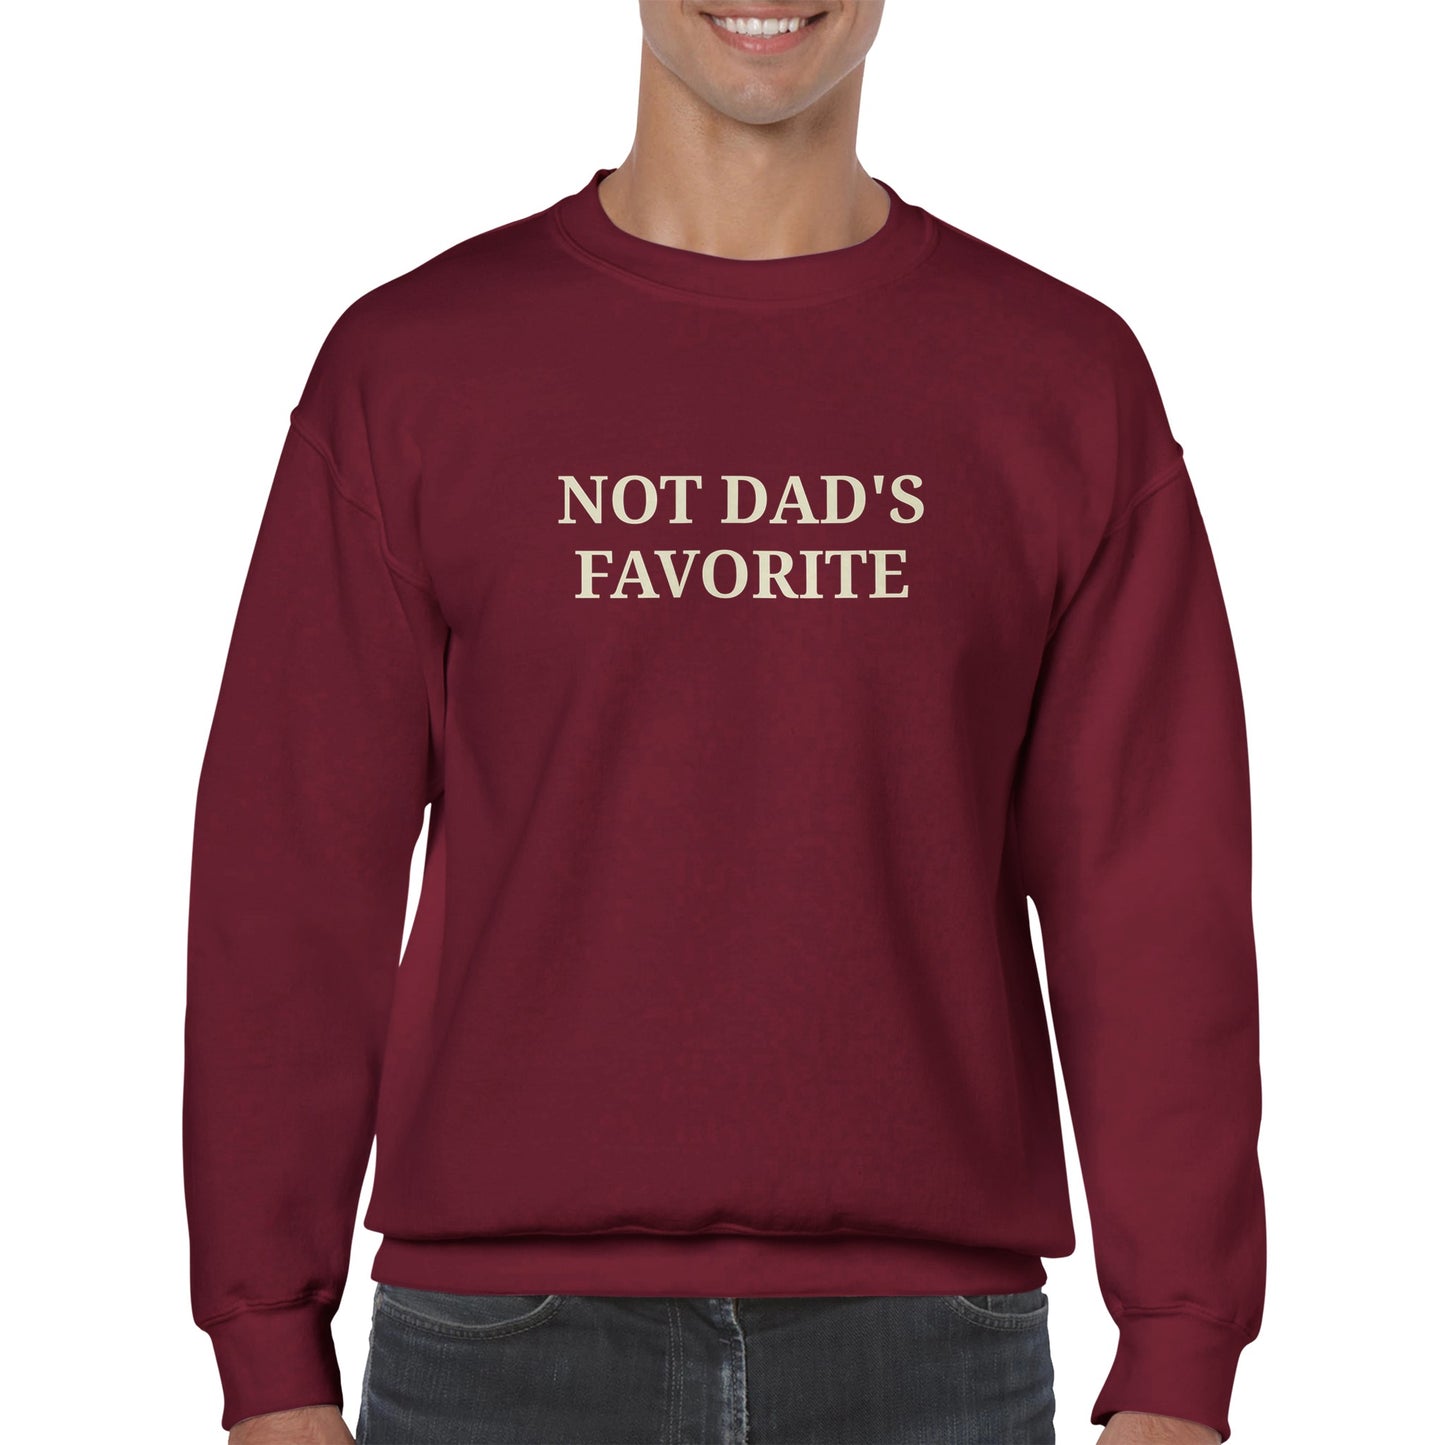 a man wearing a red sweatshirt with "Not dad's favorite" written across the chest